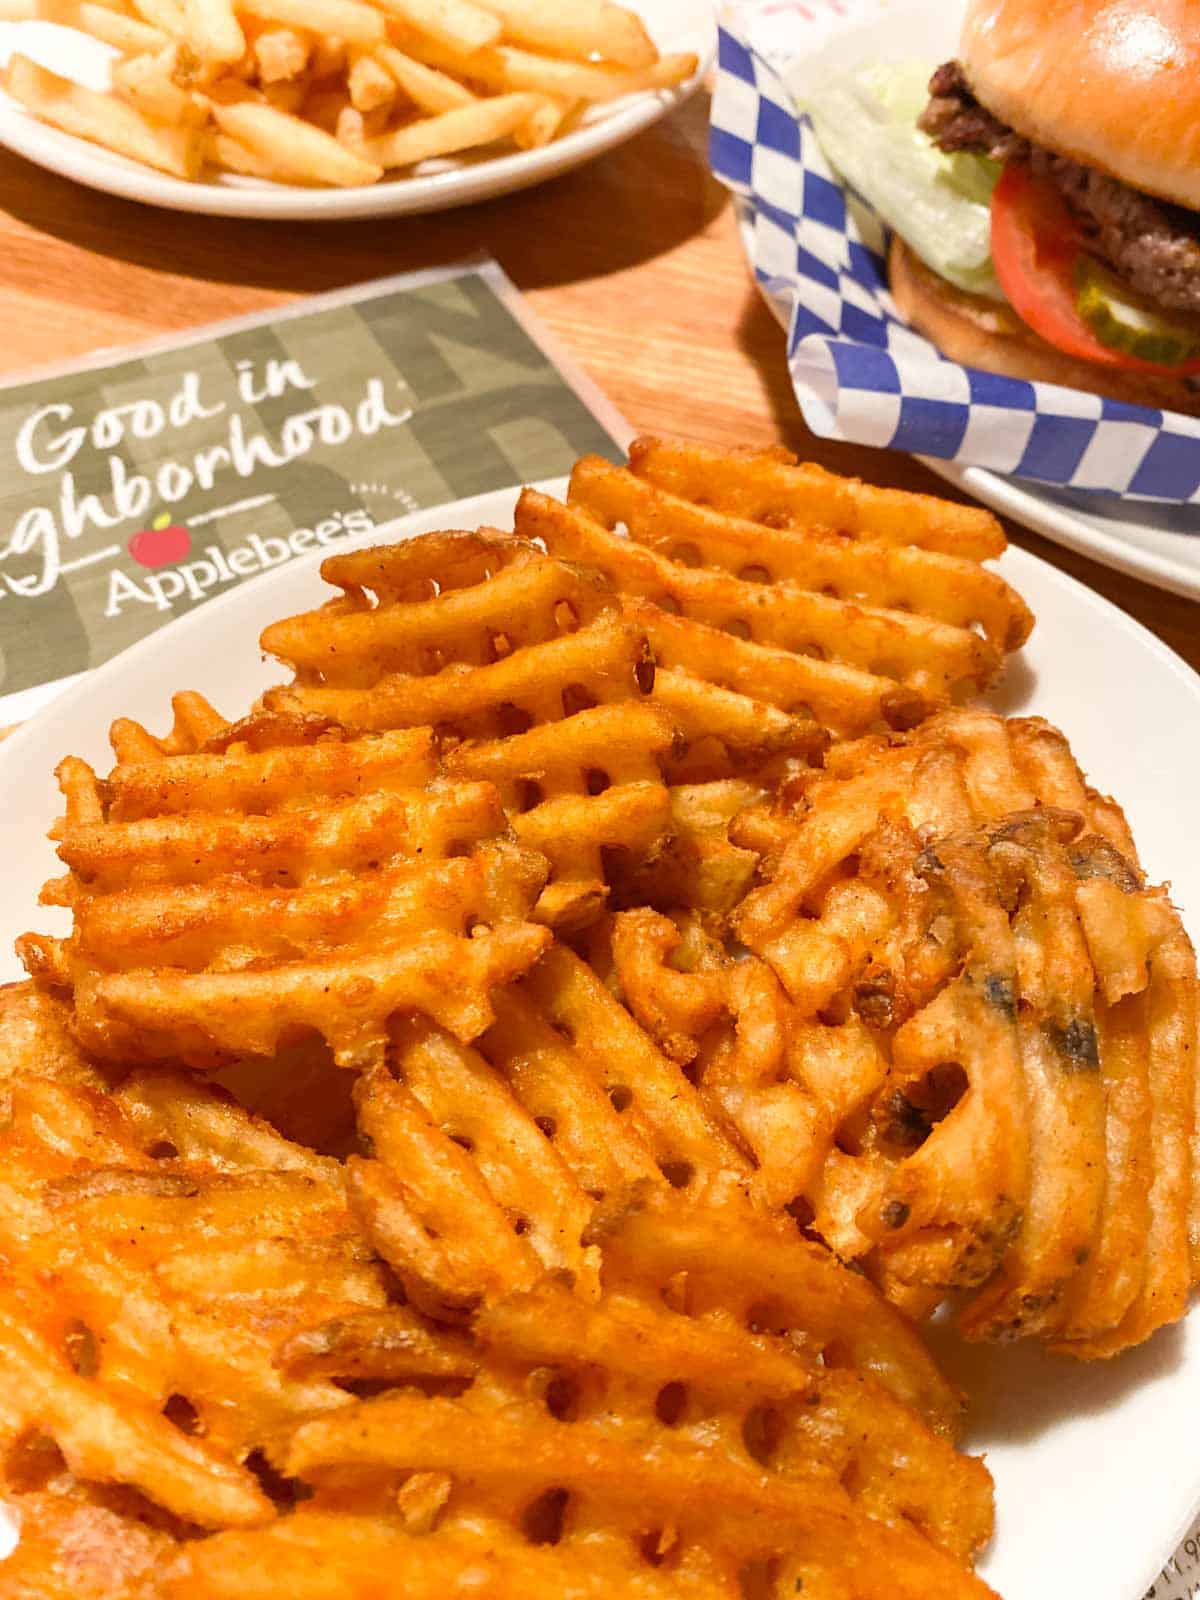 Plate of waffle fries at Applebees